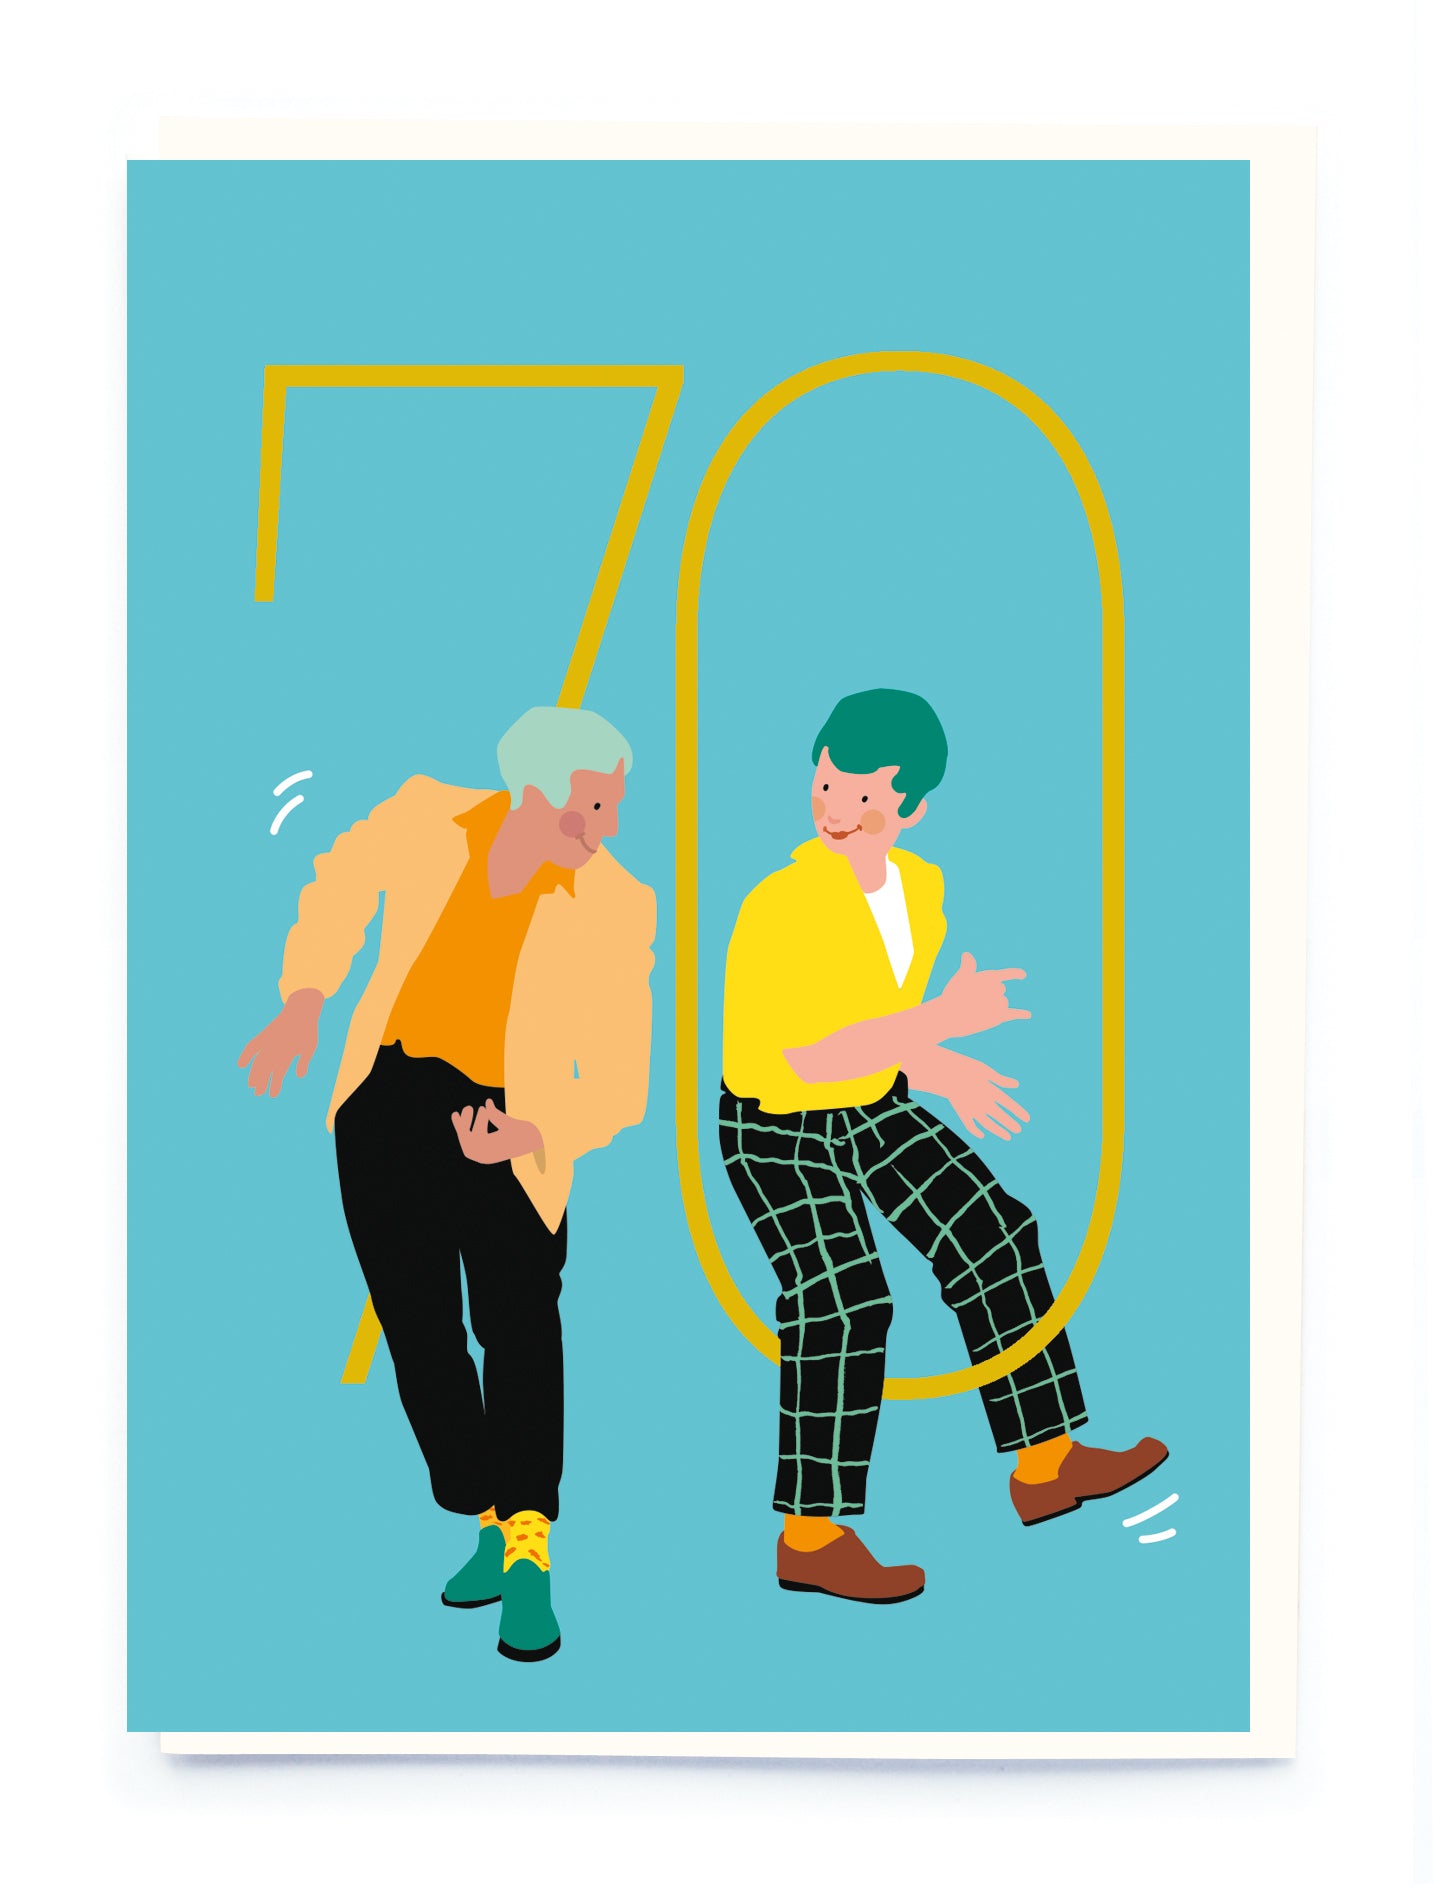 MENS AGE 70 | CARD BY NOI